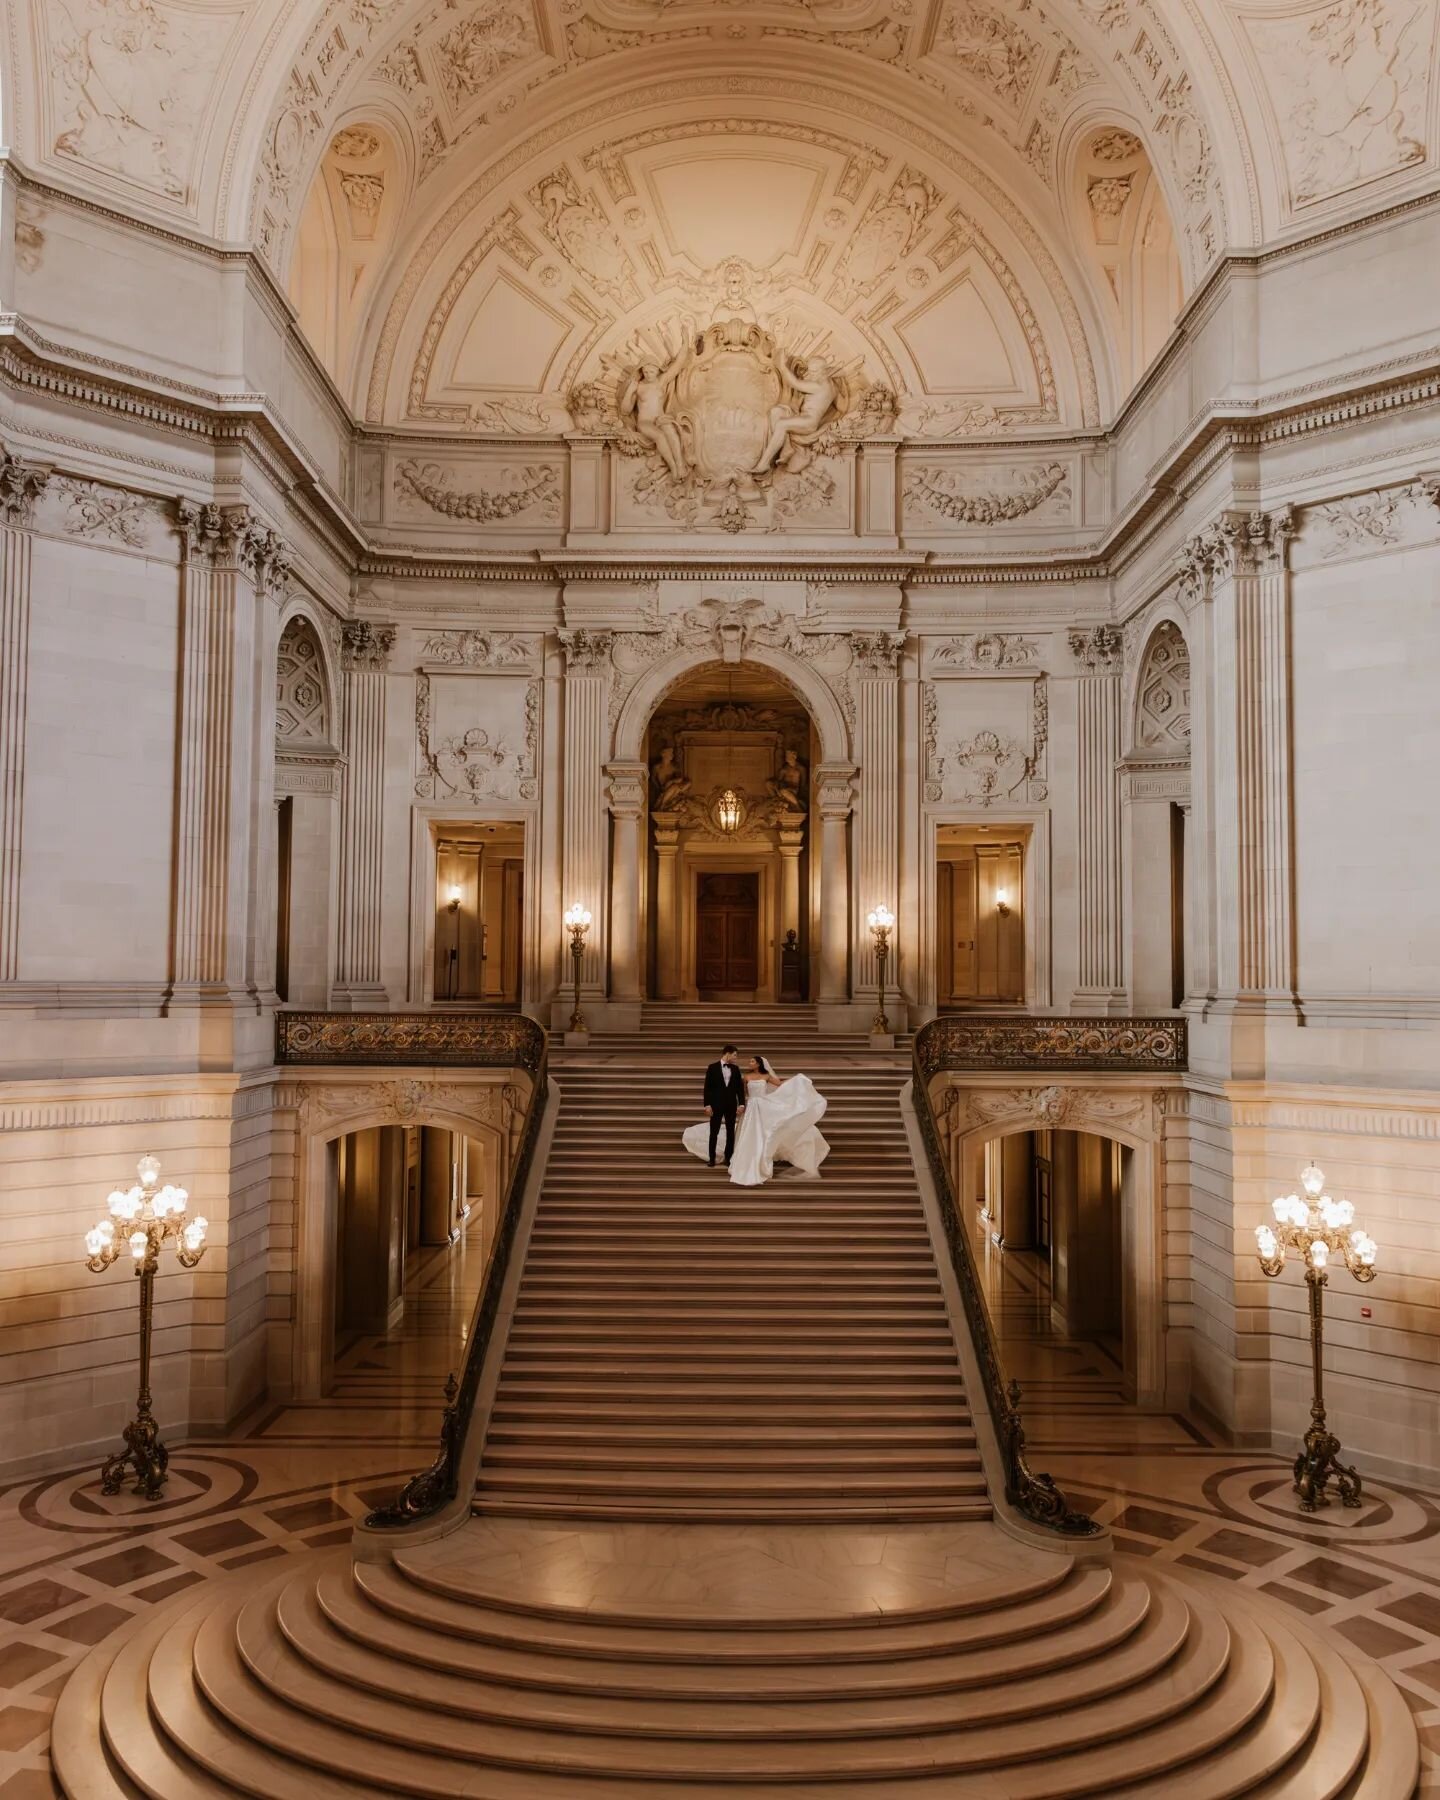 Timeless elegant wedding at the Iconic San Francisco City Hall ✨ 

Our gorgeous real couple Kyla and Luca are planners and data scientists from Italy. They're launching their company called The Content Day soon where they'll be producing styled shoot